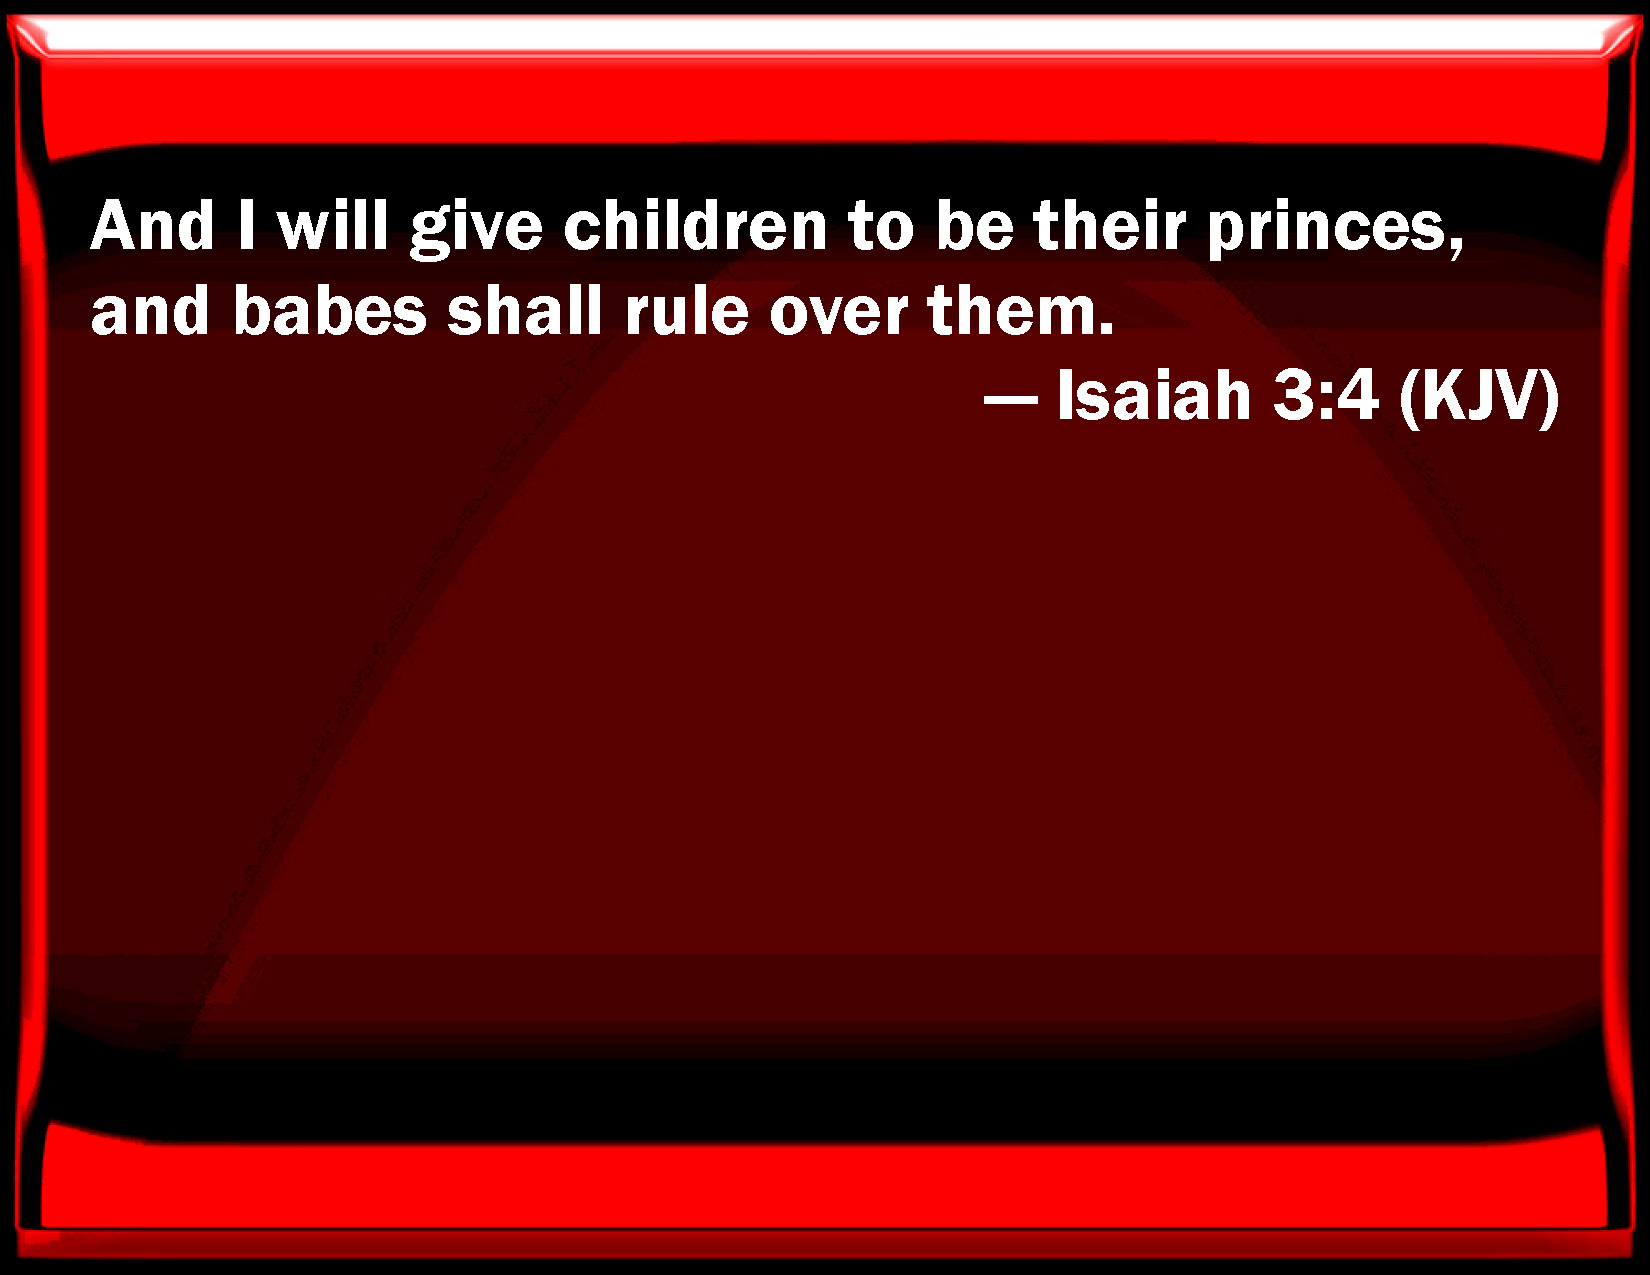 Image result for "isaiah 3:4"